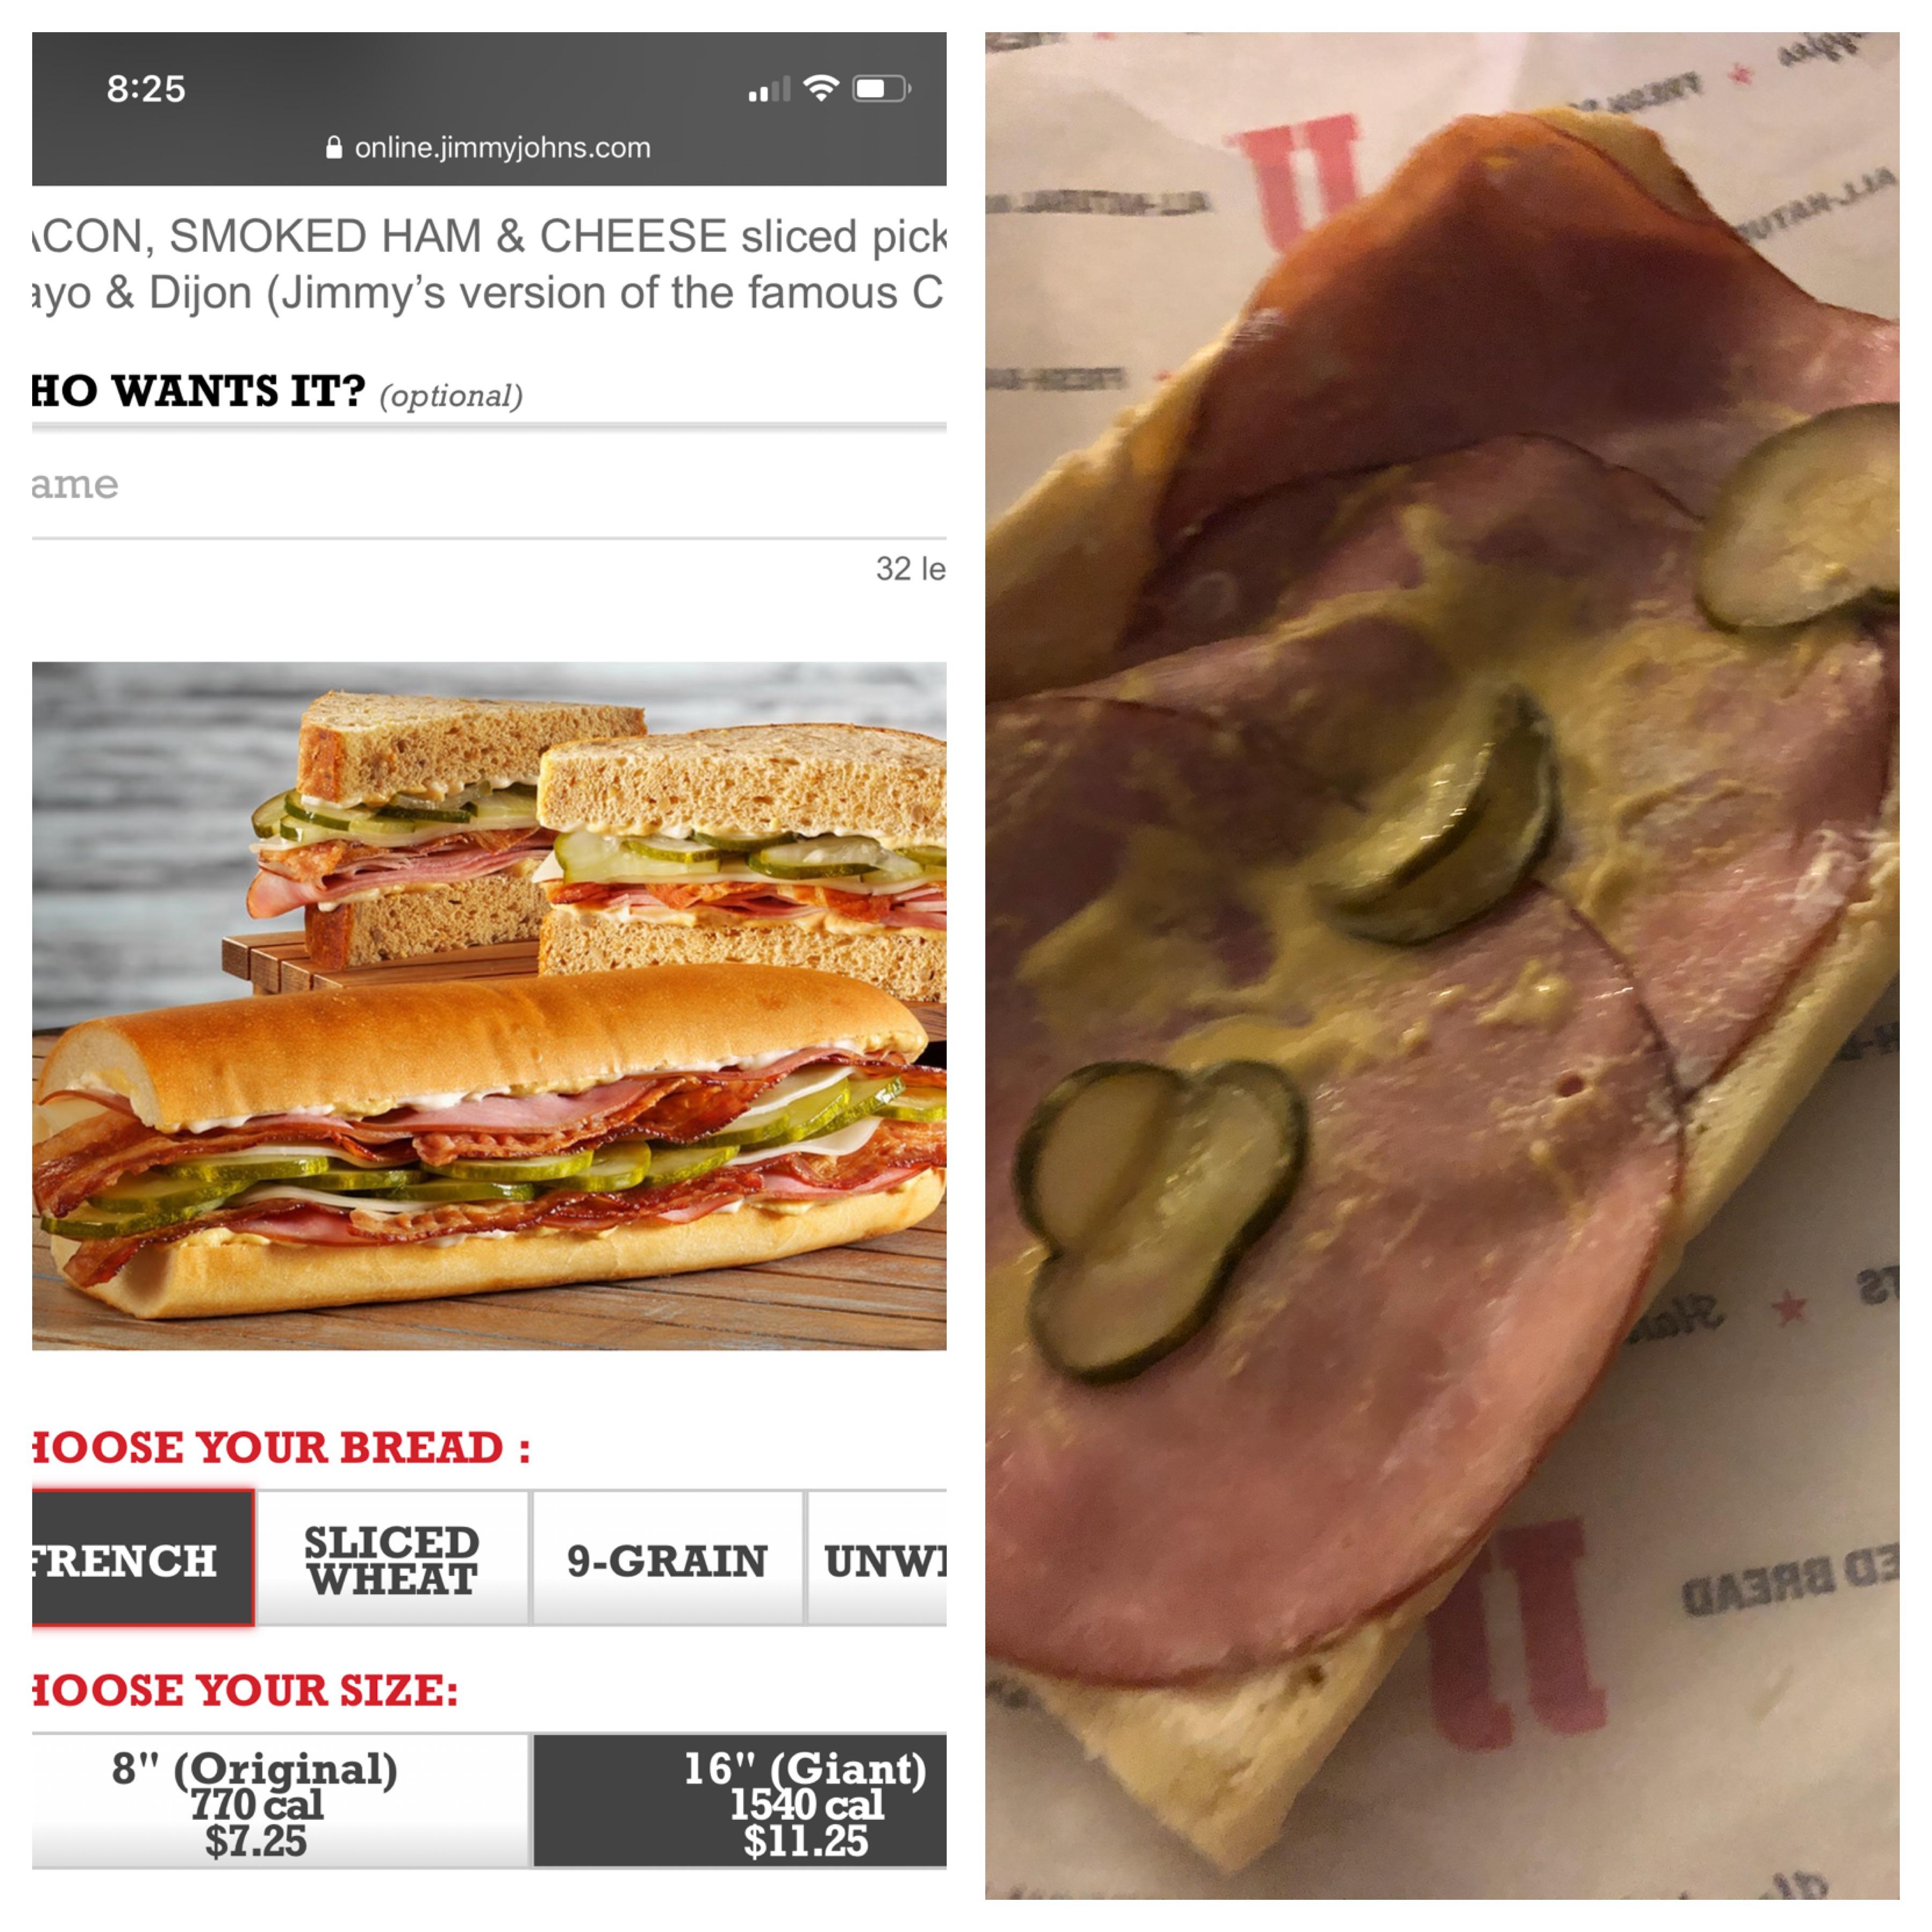 fast food - online.m ons.com Con, Smoked Ham & Cheese sliced pick iyo & Dijon Jimmy's version of the famous C Ho Wants It? optional ame 32 le Ioose Your Bread French Sliced 9Grain Unwi Garage Ioose Your Size 8" Original